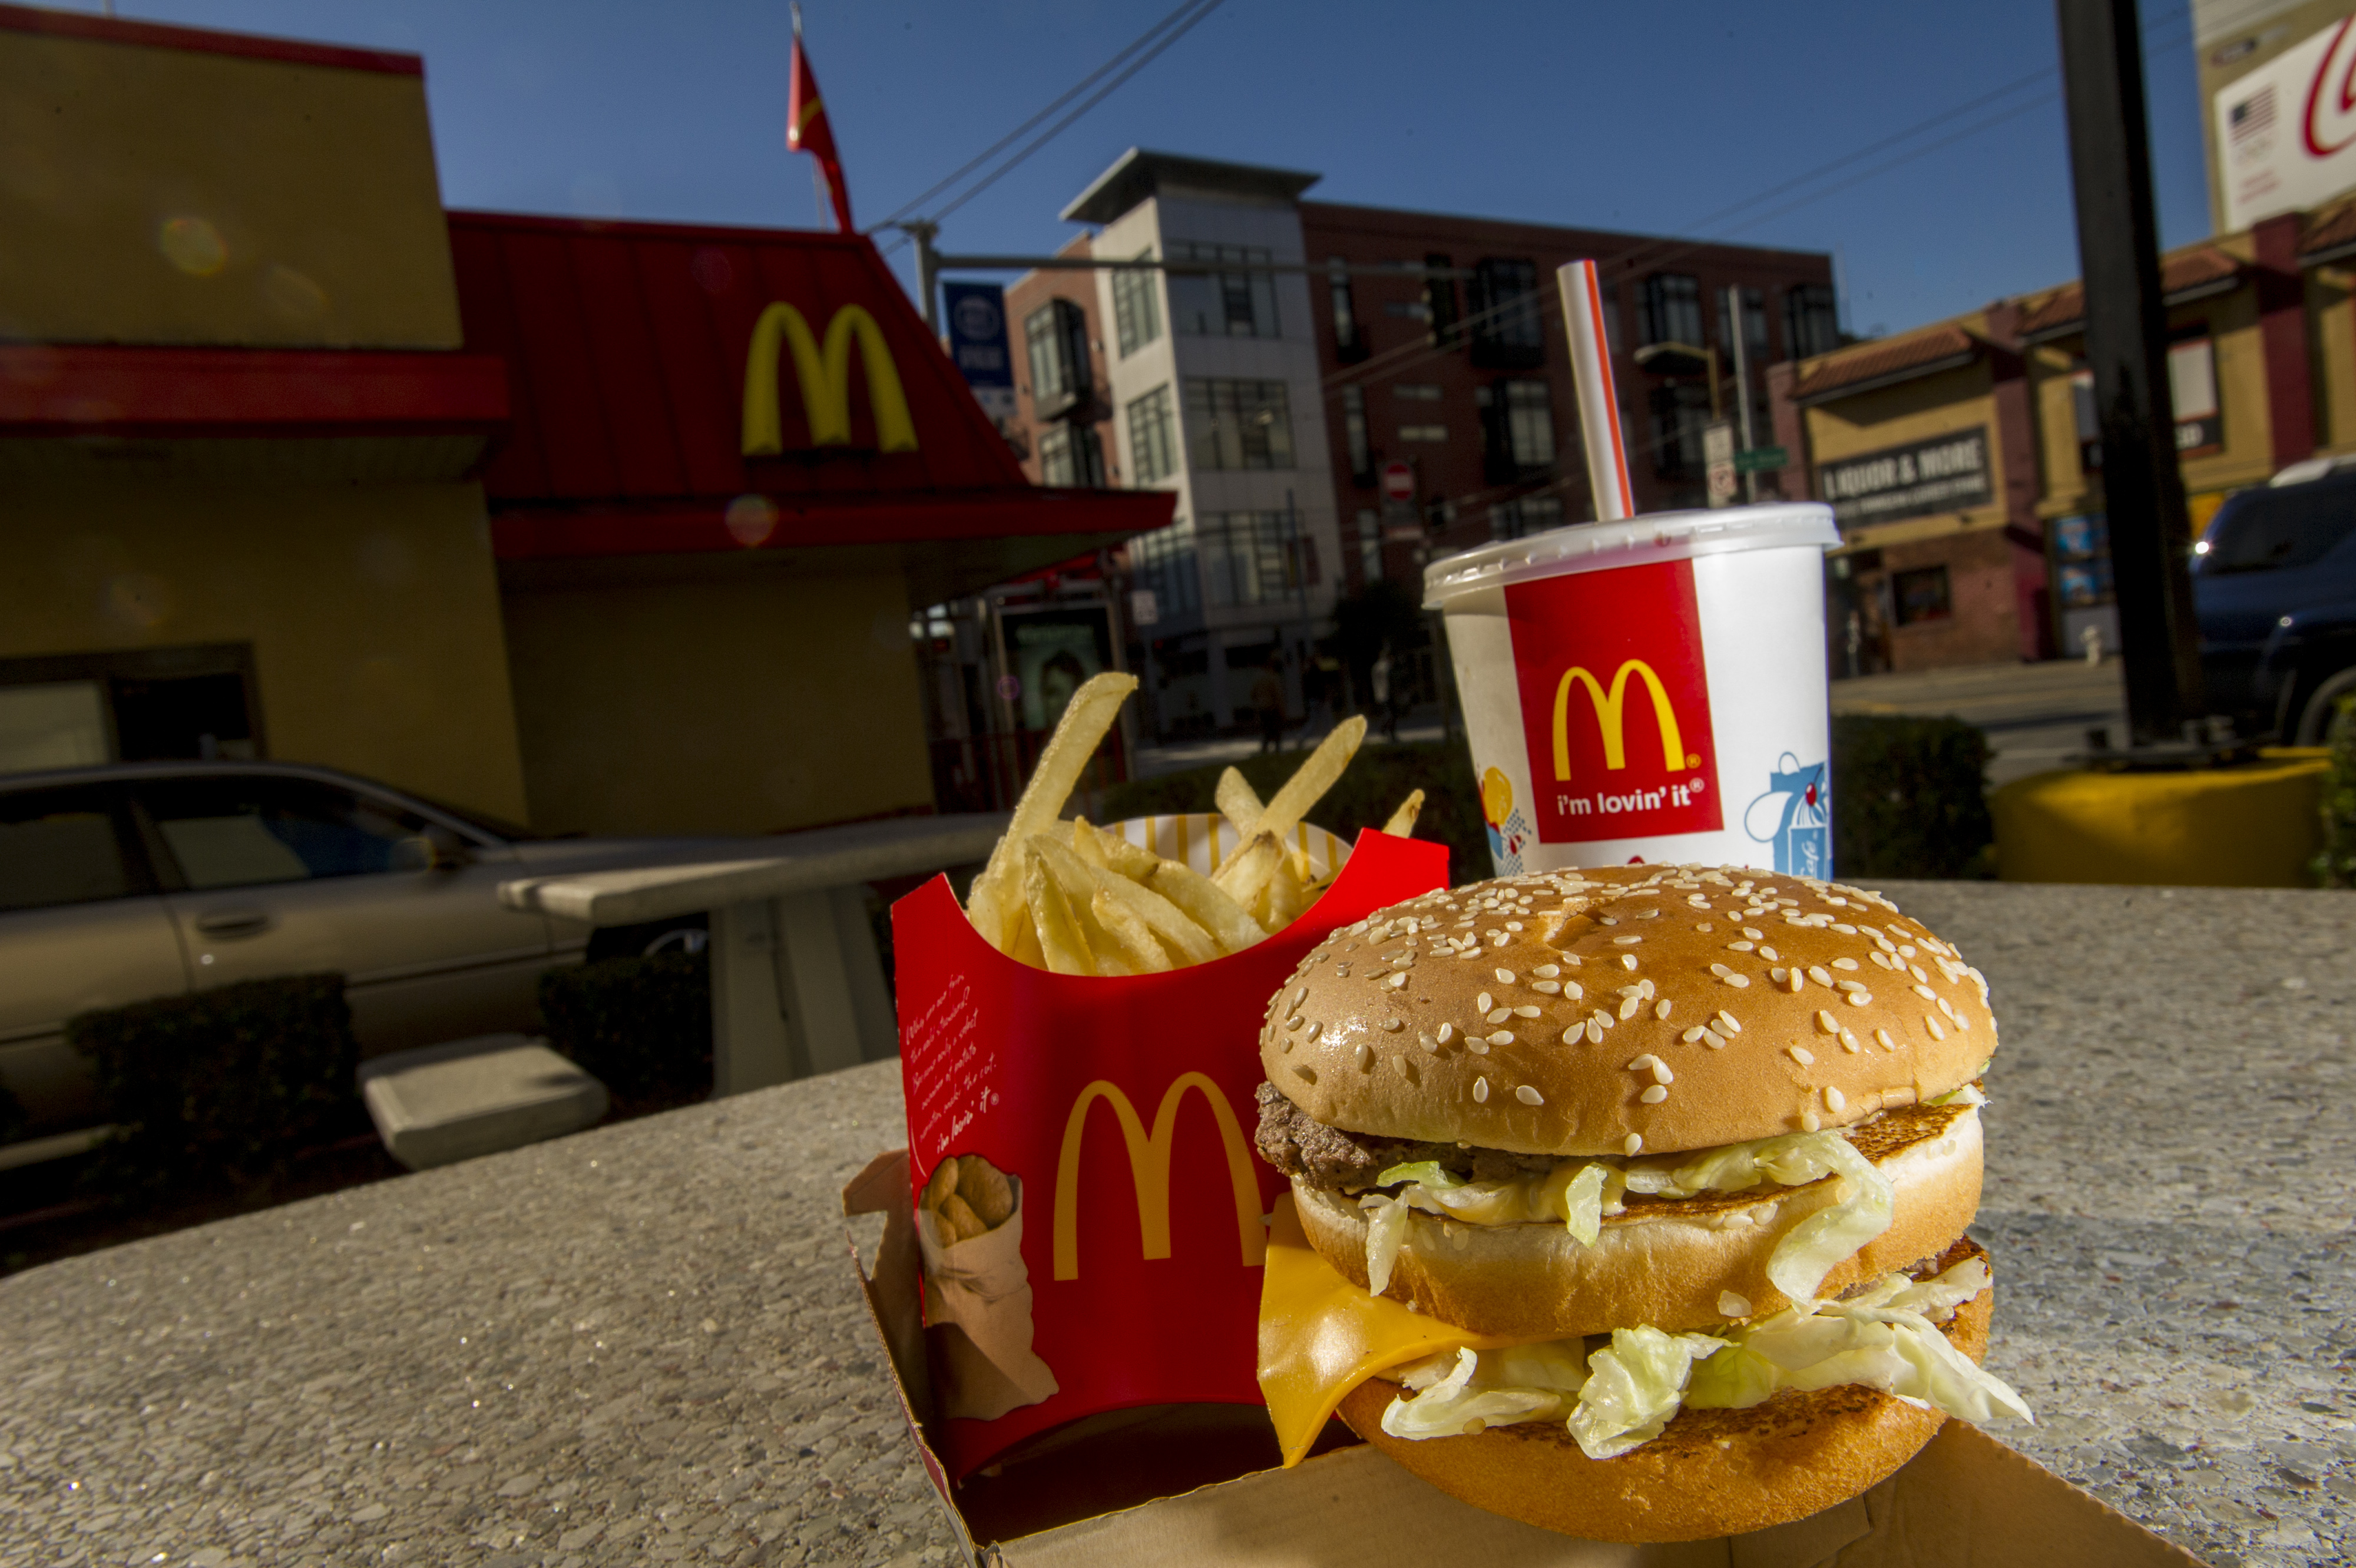 A McDonald's Corp. Big Mac meal is arranged for a photograph outside of a restaurant in San Francisco, California, U.S., on Wednesday, Jan. 22, 2014. (David Paul Morris&mdash;Bloomberg / Getty Images)